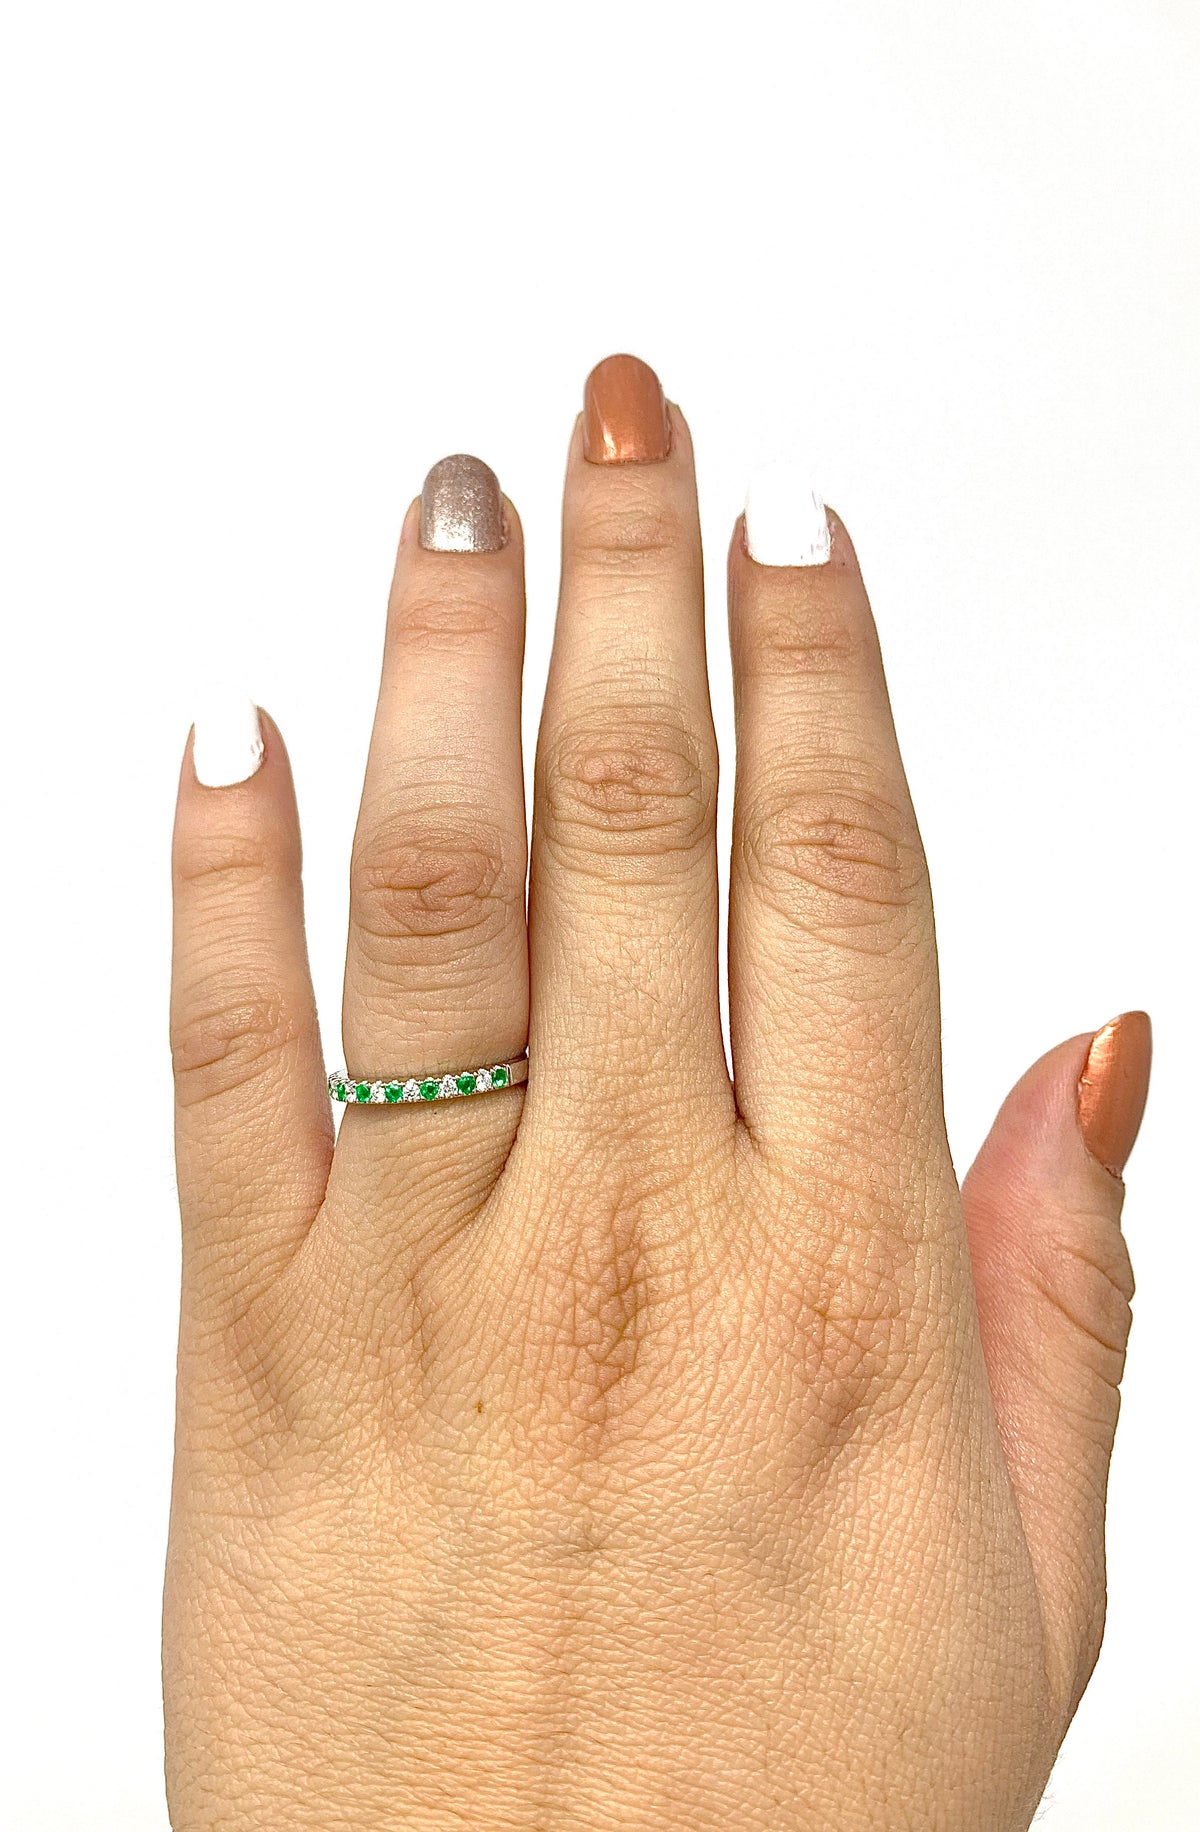 14K White Gold Emerald and Diamond Ring-Size 6.5